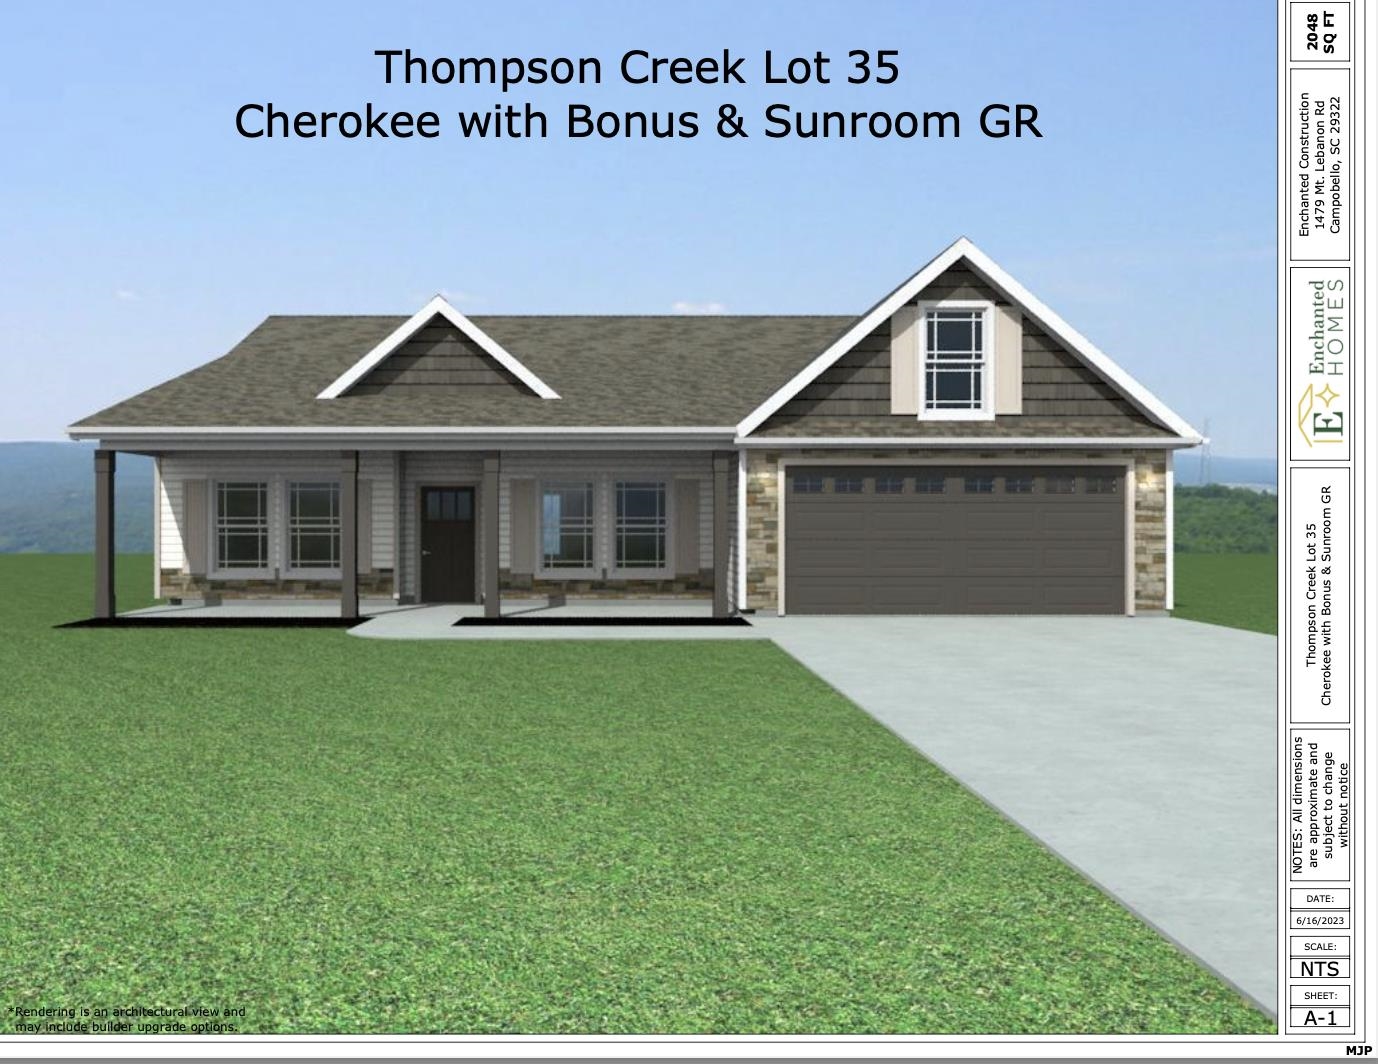 Preferred Lender/Attorney Closing Costs Incentive Offered! Welcome to Thompson Creek! The Cherokee plan offers a beautiful, modern layout. Split floor plan. Kitchen open to dining area. Home complete with builder trademark chair rail, crown molding, and rope lighting. Luxury Vinyl Plank/Tile flooring in all areas with exception of carpet in bedrooms.  12x12 sunroom and Covered 12x12 back patio. Granite counters throughout.  Lot 36